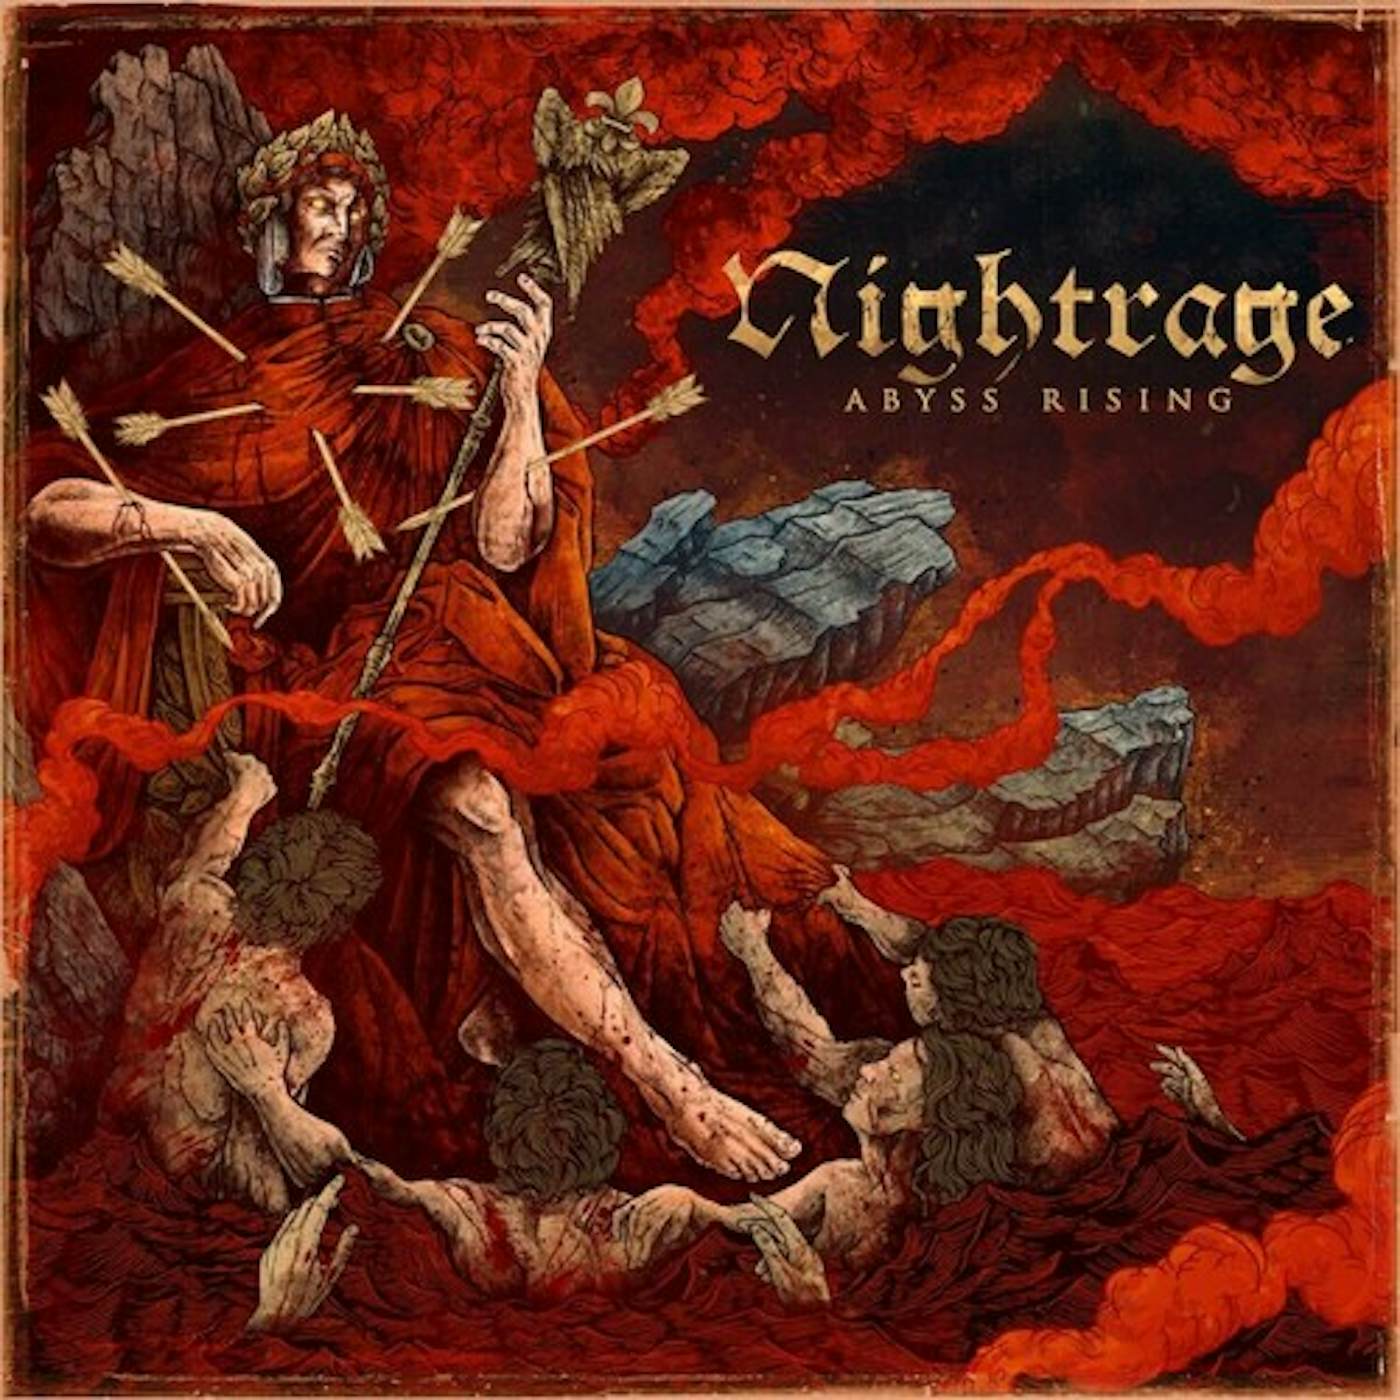 Nightrage ABYSS RISING CD